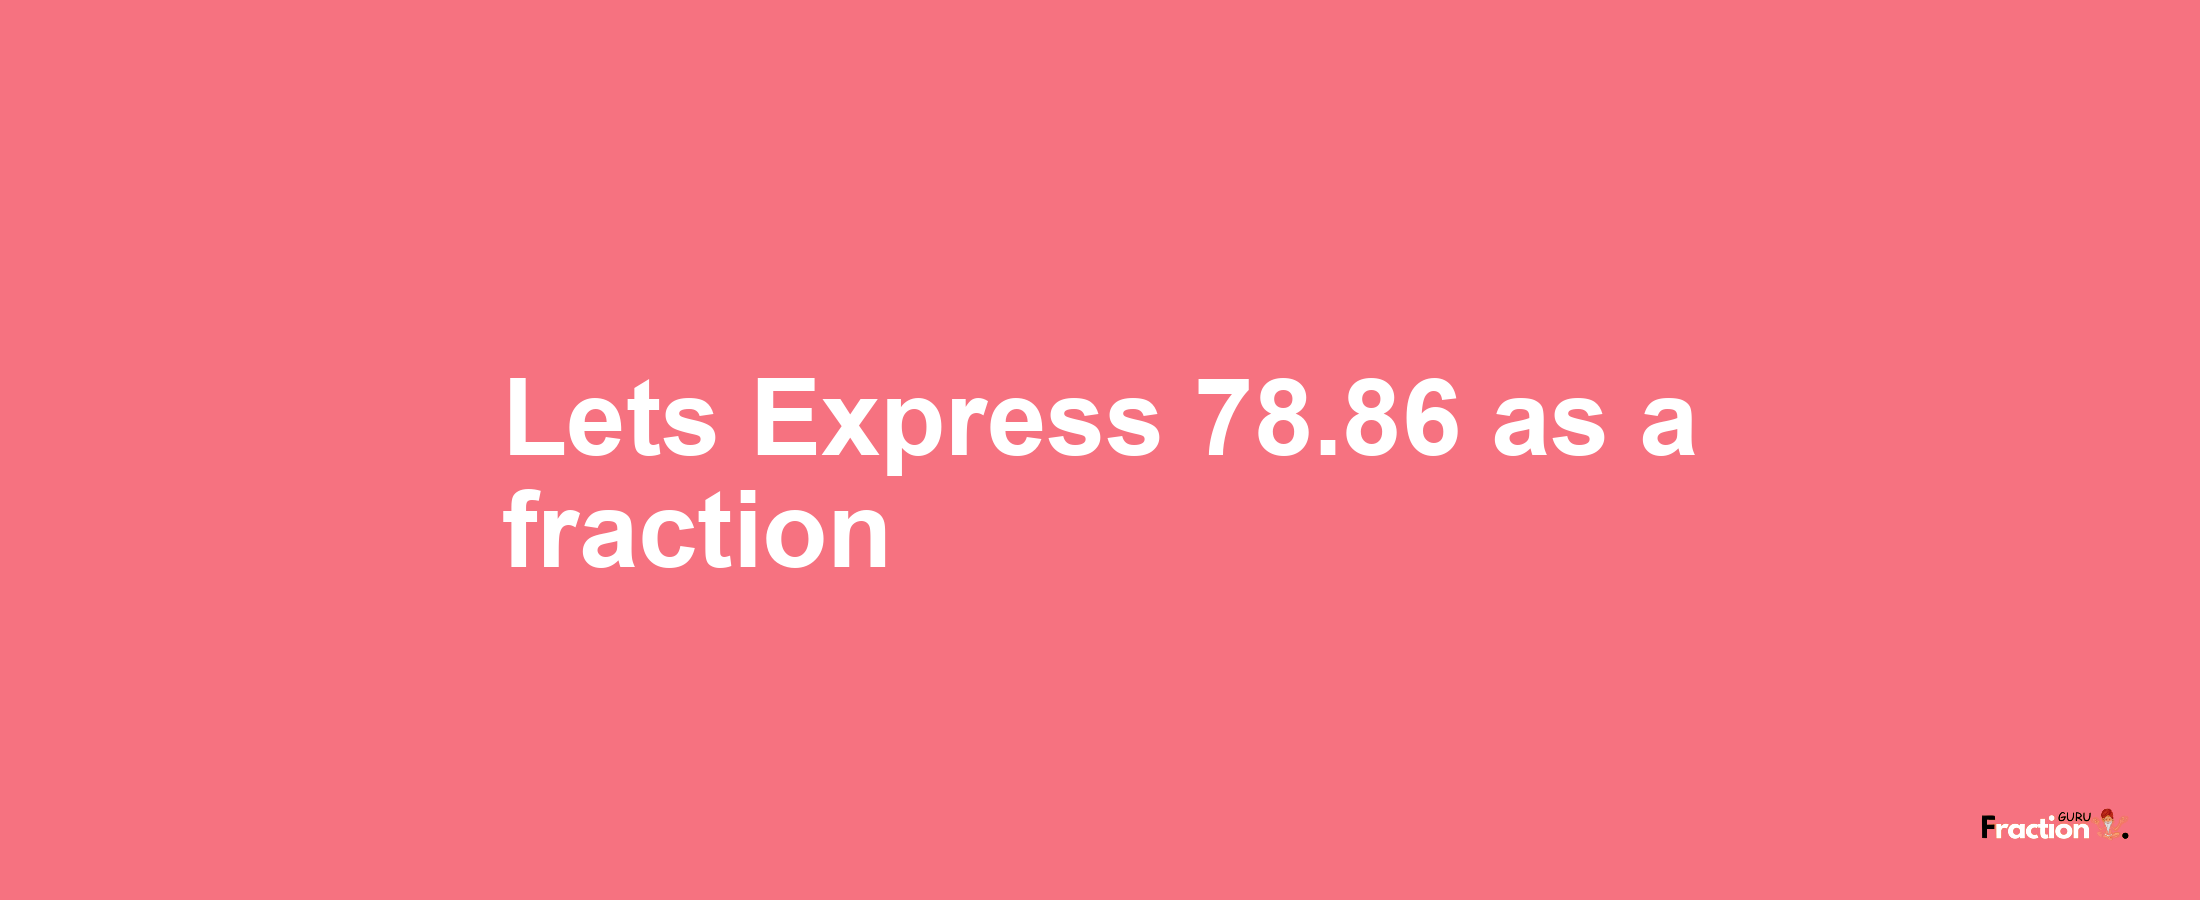 Lets Express 78.86 as afraction